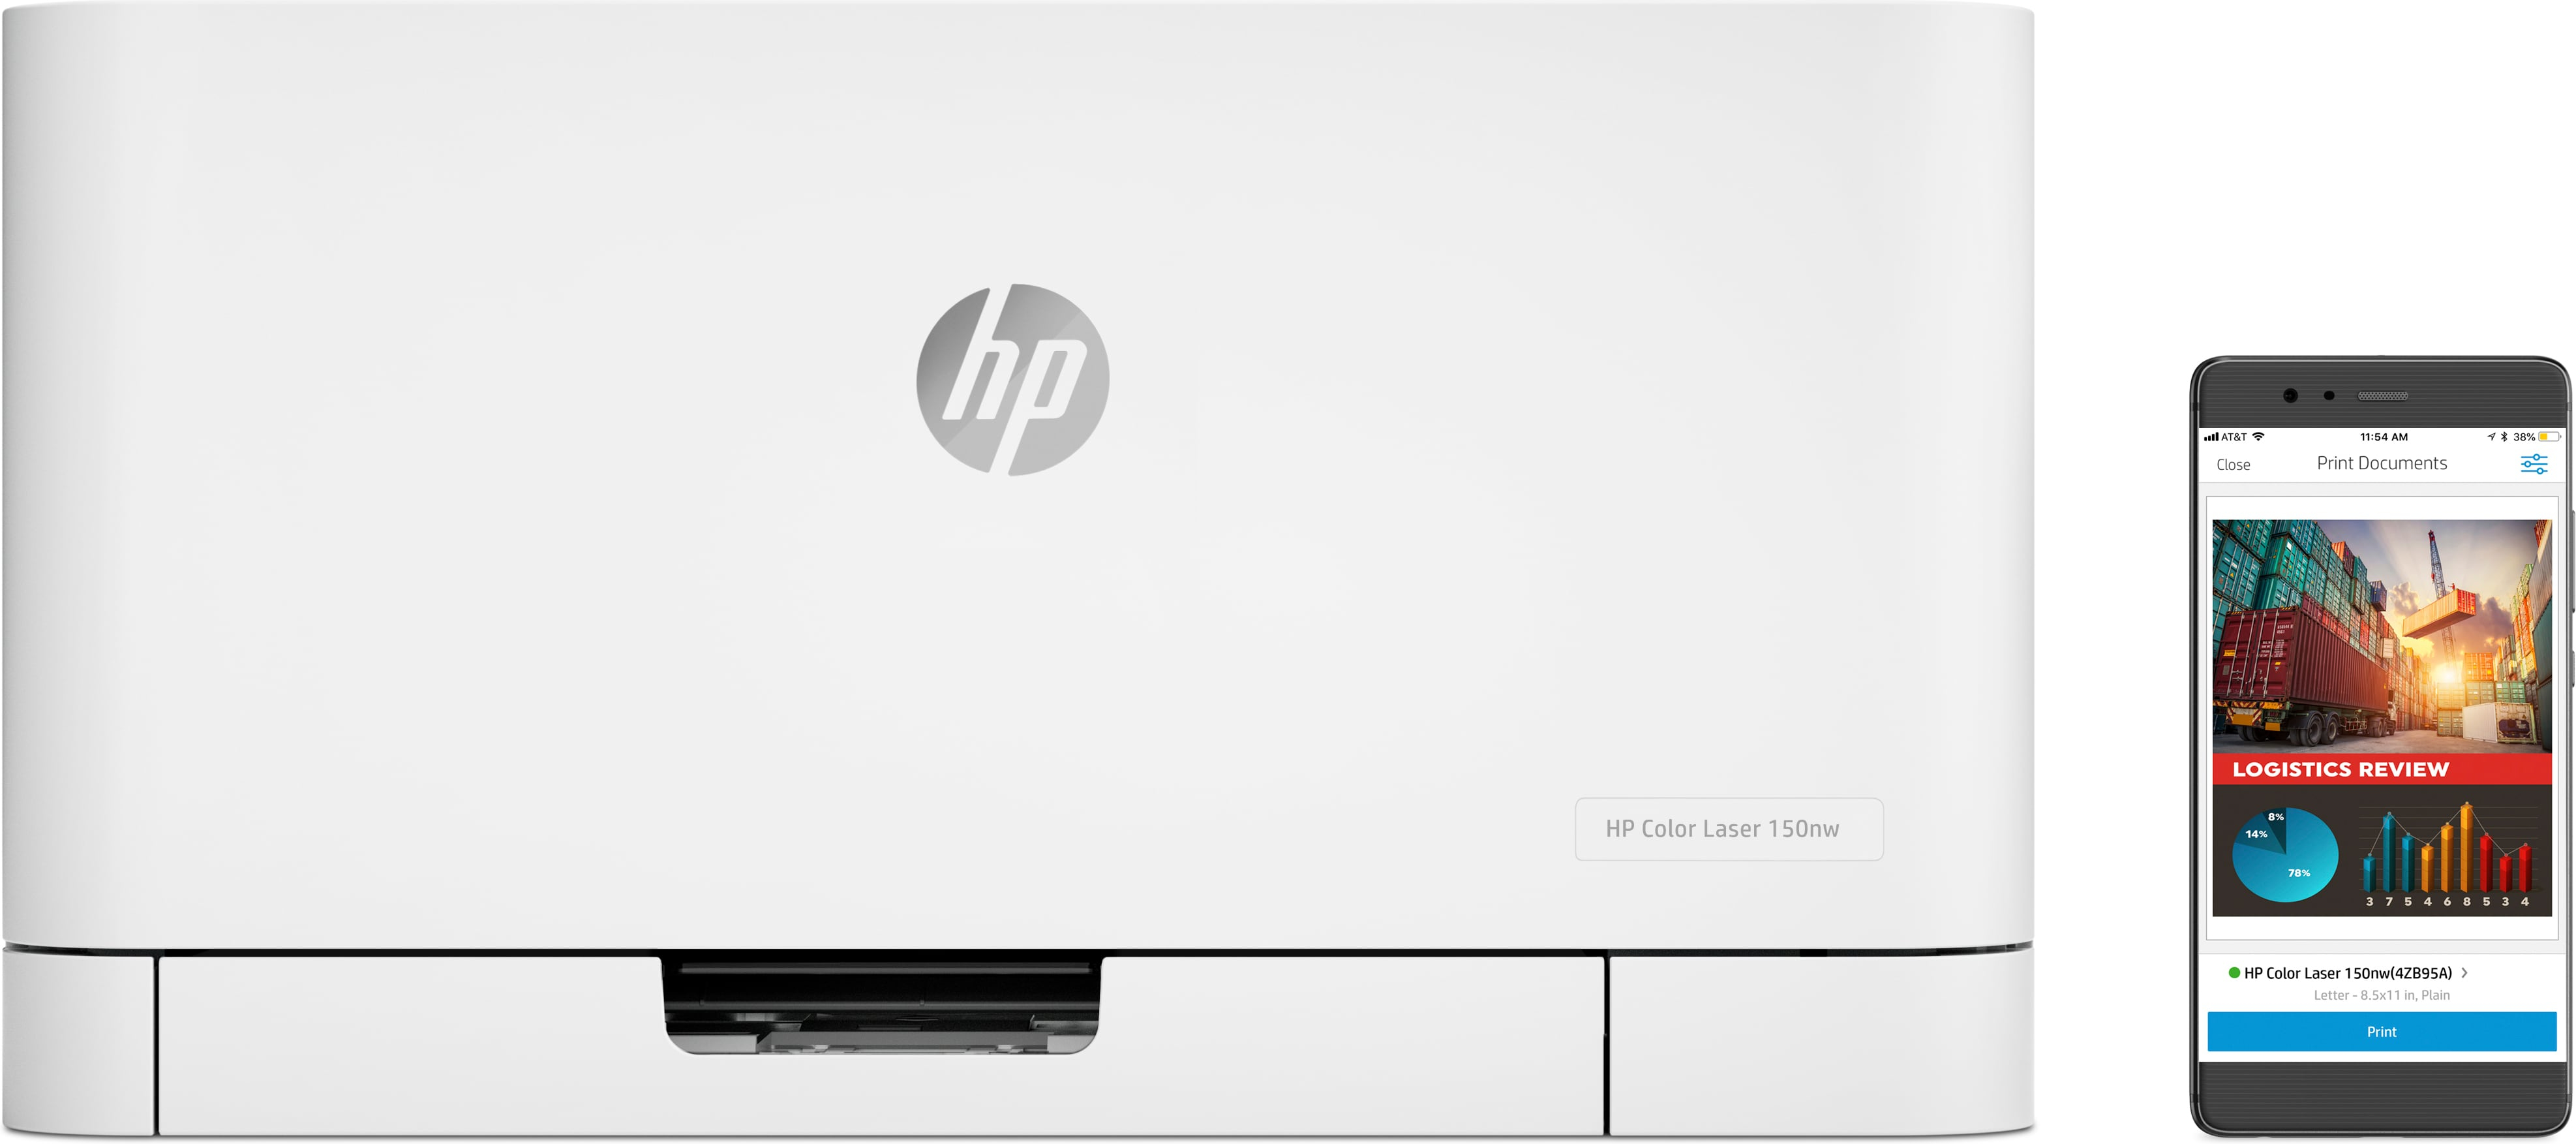 HP IMP.LASER COL 4ZB95A 150NW